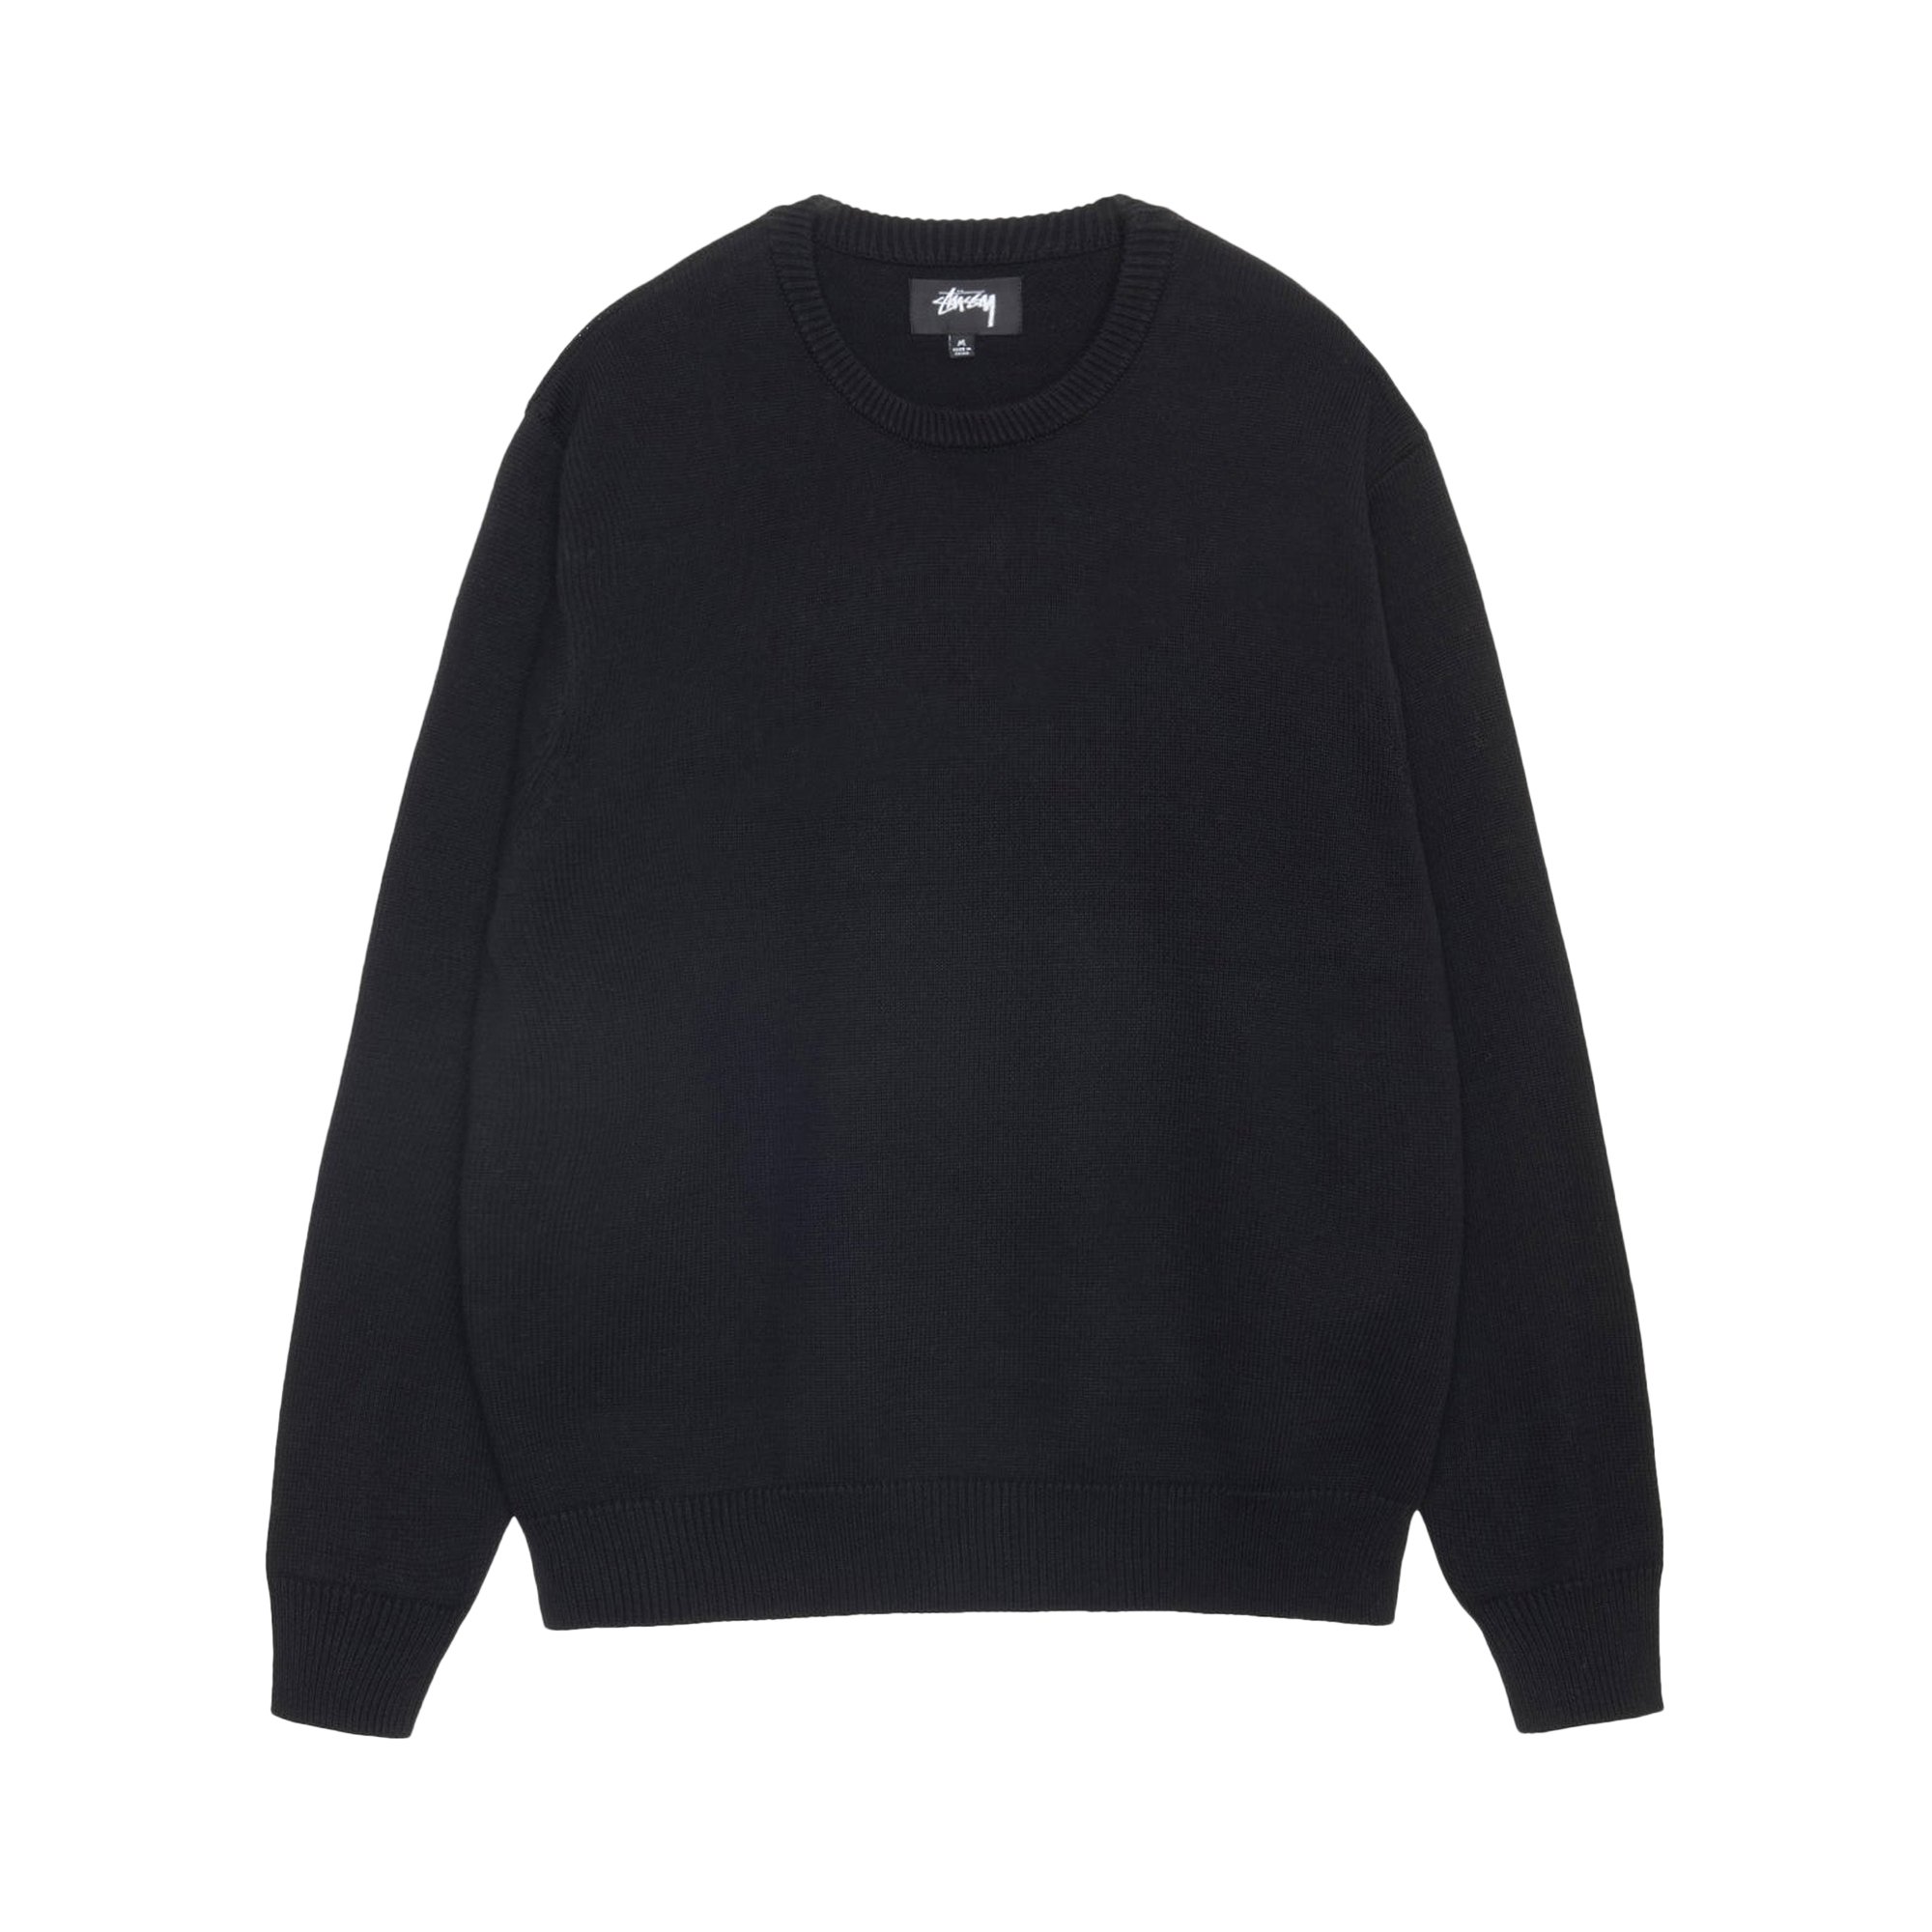 Buy Stussy Authentic Workgear Sweater 'Black' - 117212 BLAC | GOAT NL